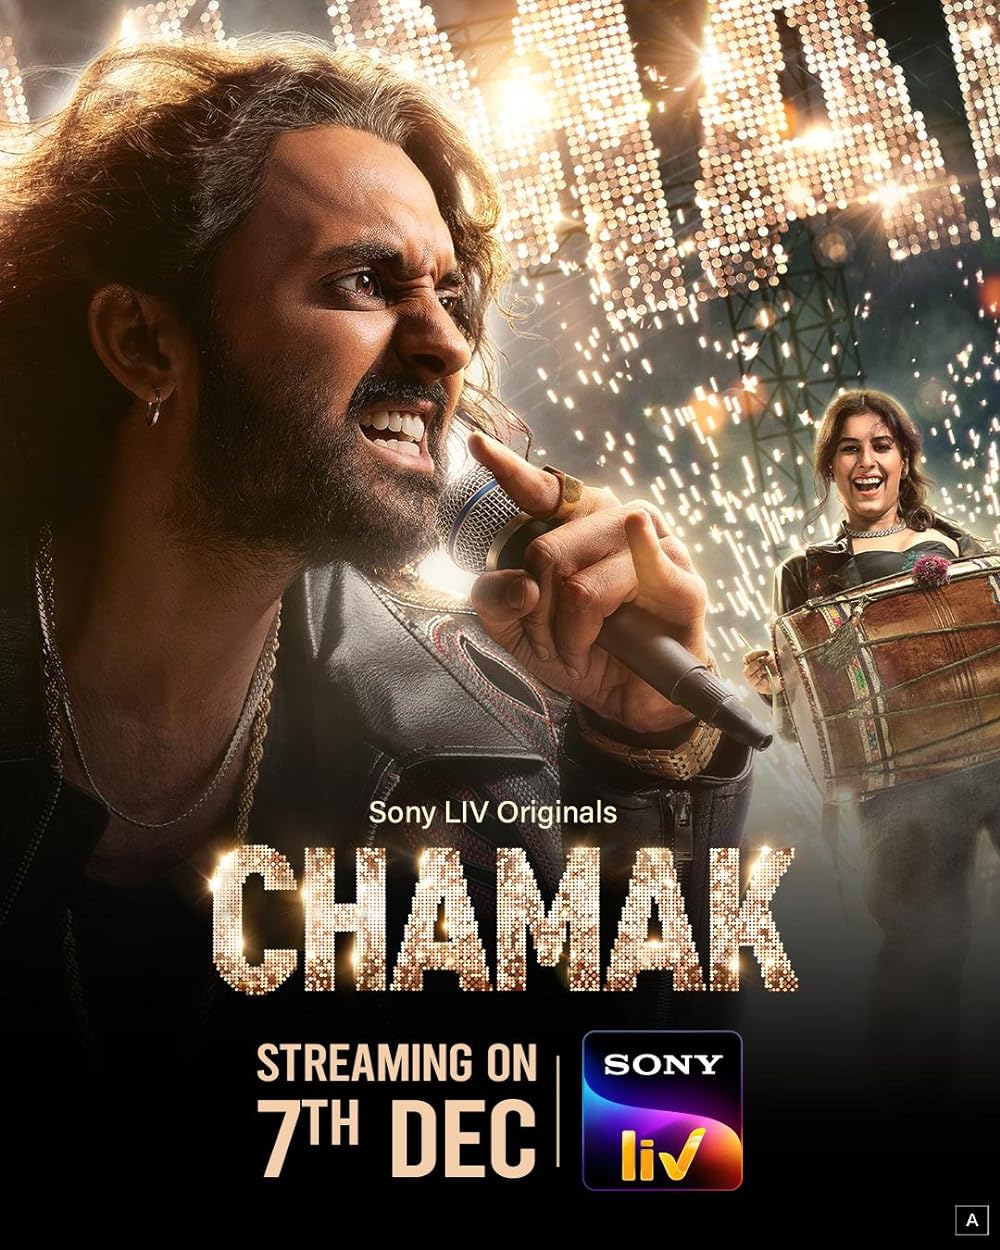 Chamak (December 7) -  SonyLivFollow the intriguing story of Kaala, a talented rapper from Canada, as he returns to Punjab to investigate the shocking shooting death of Taara Singh, a renowned vocalist. Witness the drama unfold exclusively on SonyLiv starting December 7.